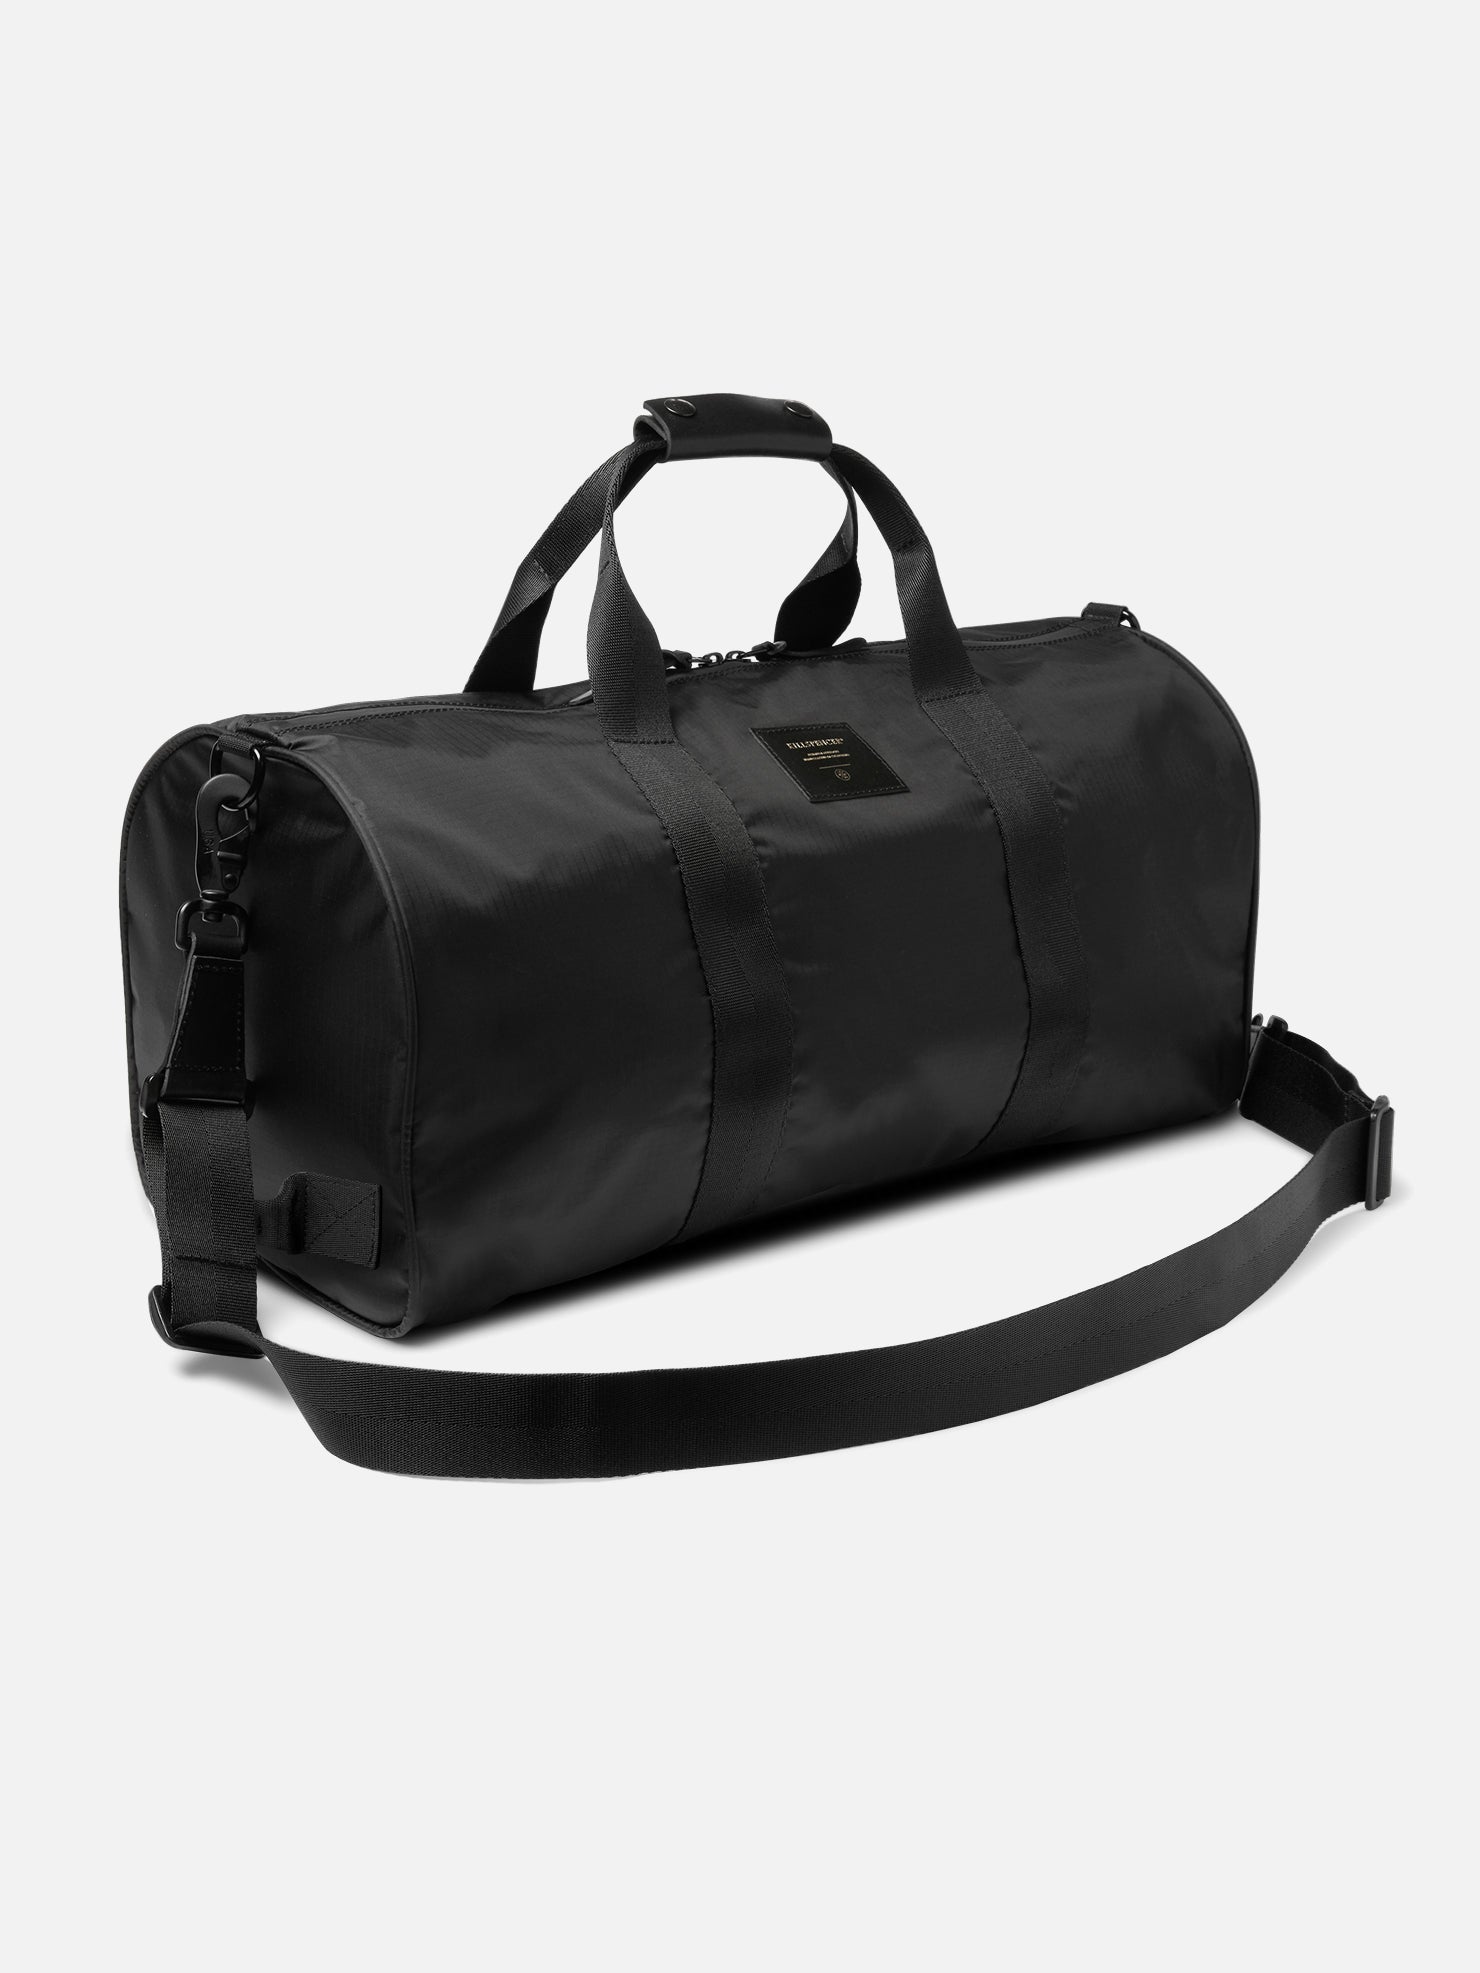 THE SACK CO Black Travel Duffle Bag \Leather Gym Bag/ Duffle Bag for Men  and Women Duffel Without Wheels BLACK - Price in India | Flipkart.com